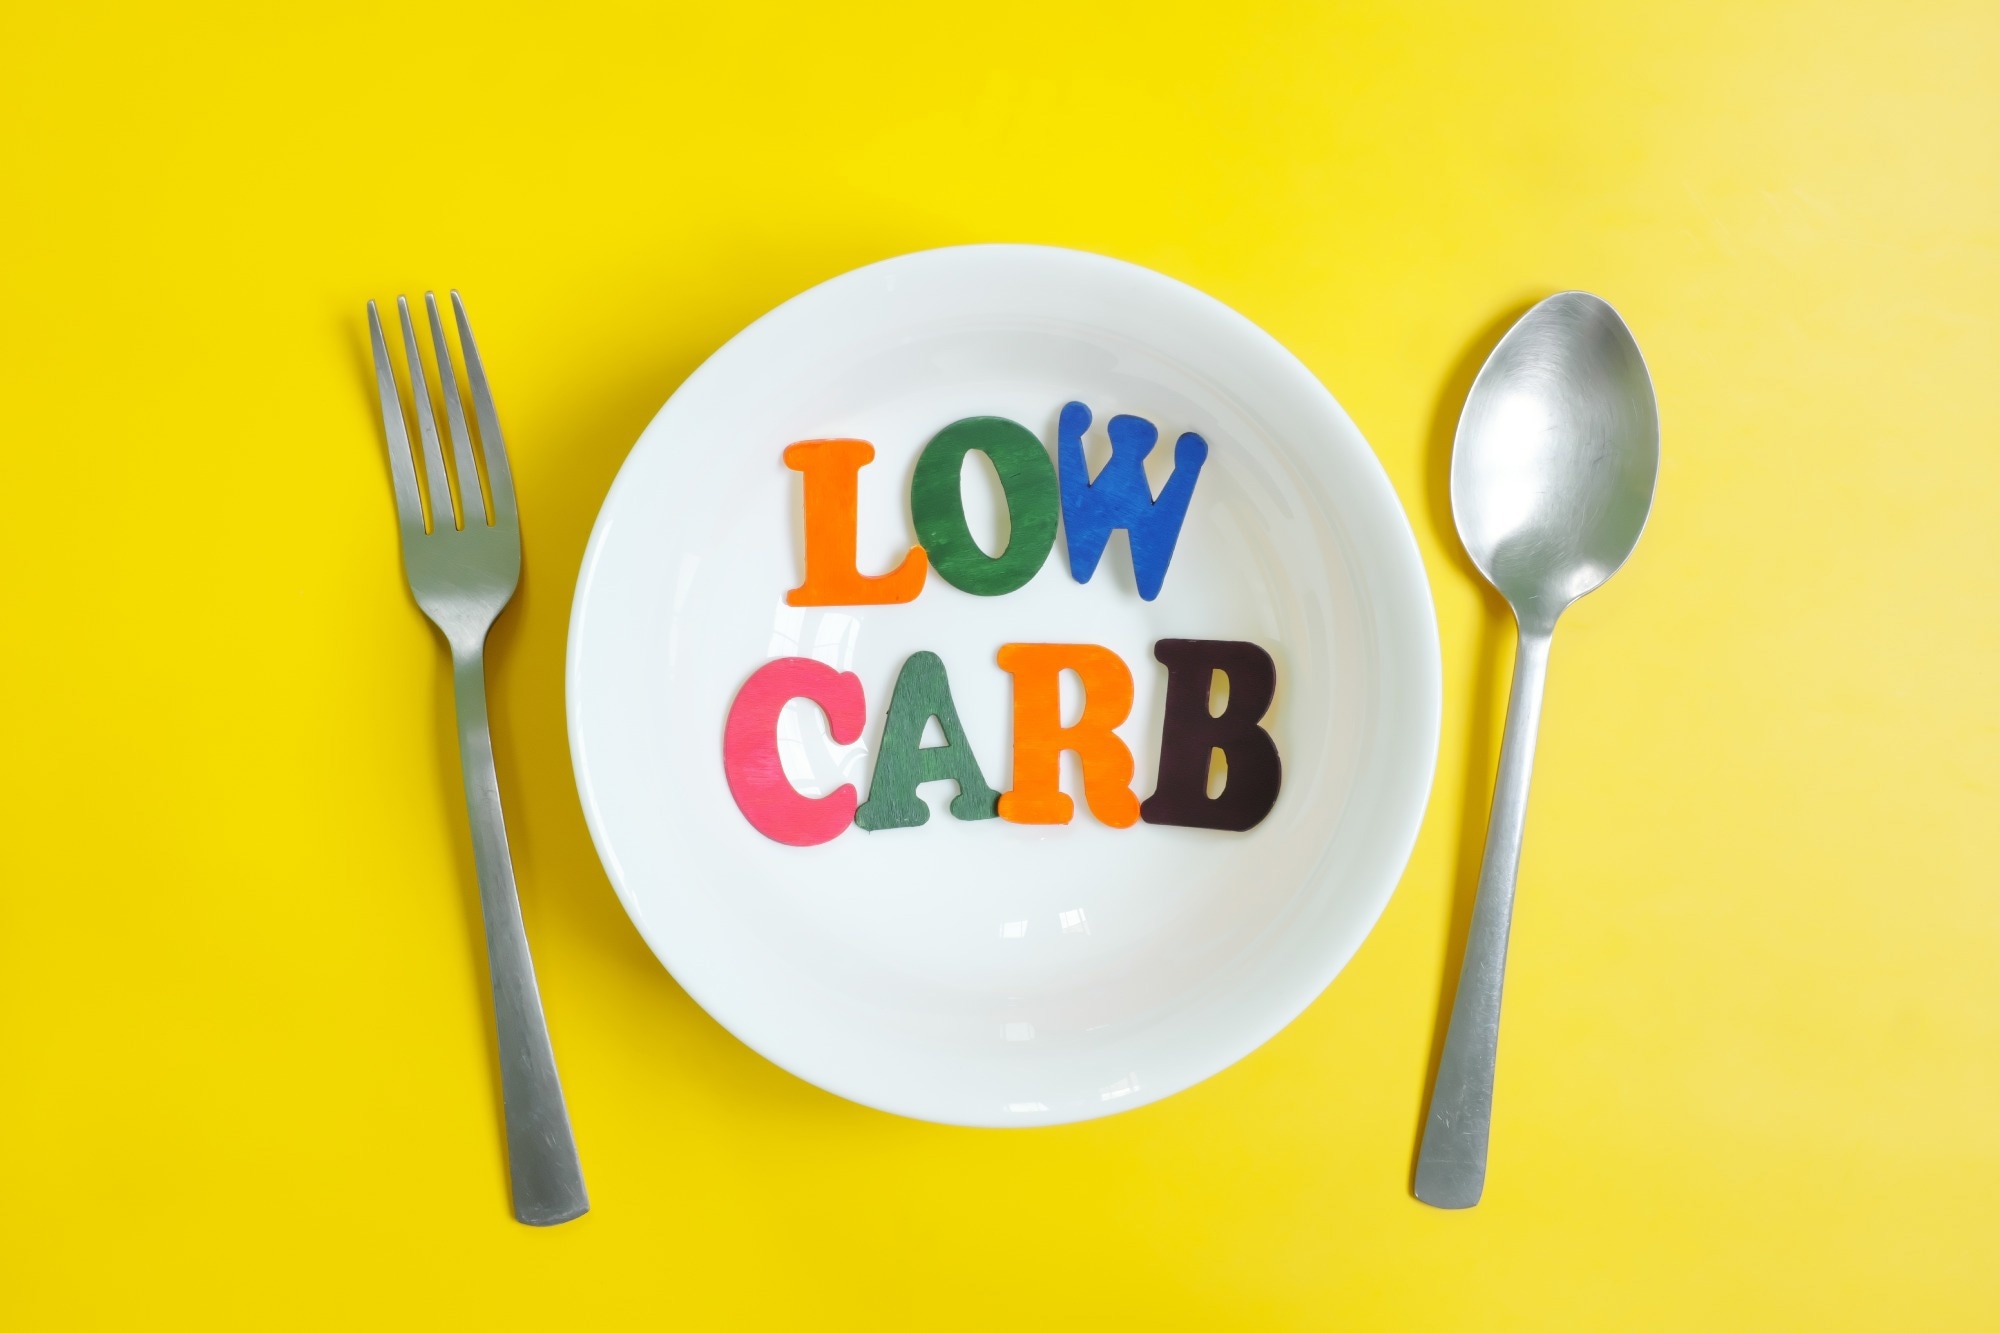 Editorial: How low should one go in reducing carbohydrate? Image Credit: sulit.photos / Shutterstock